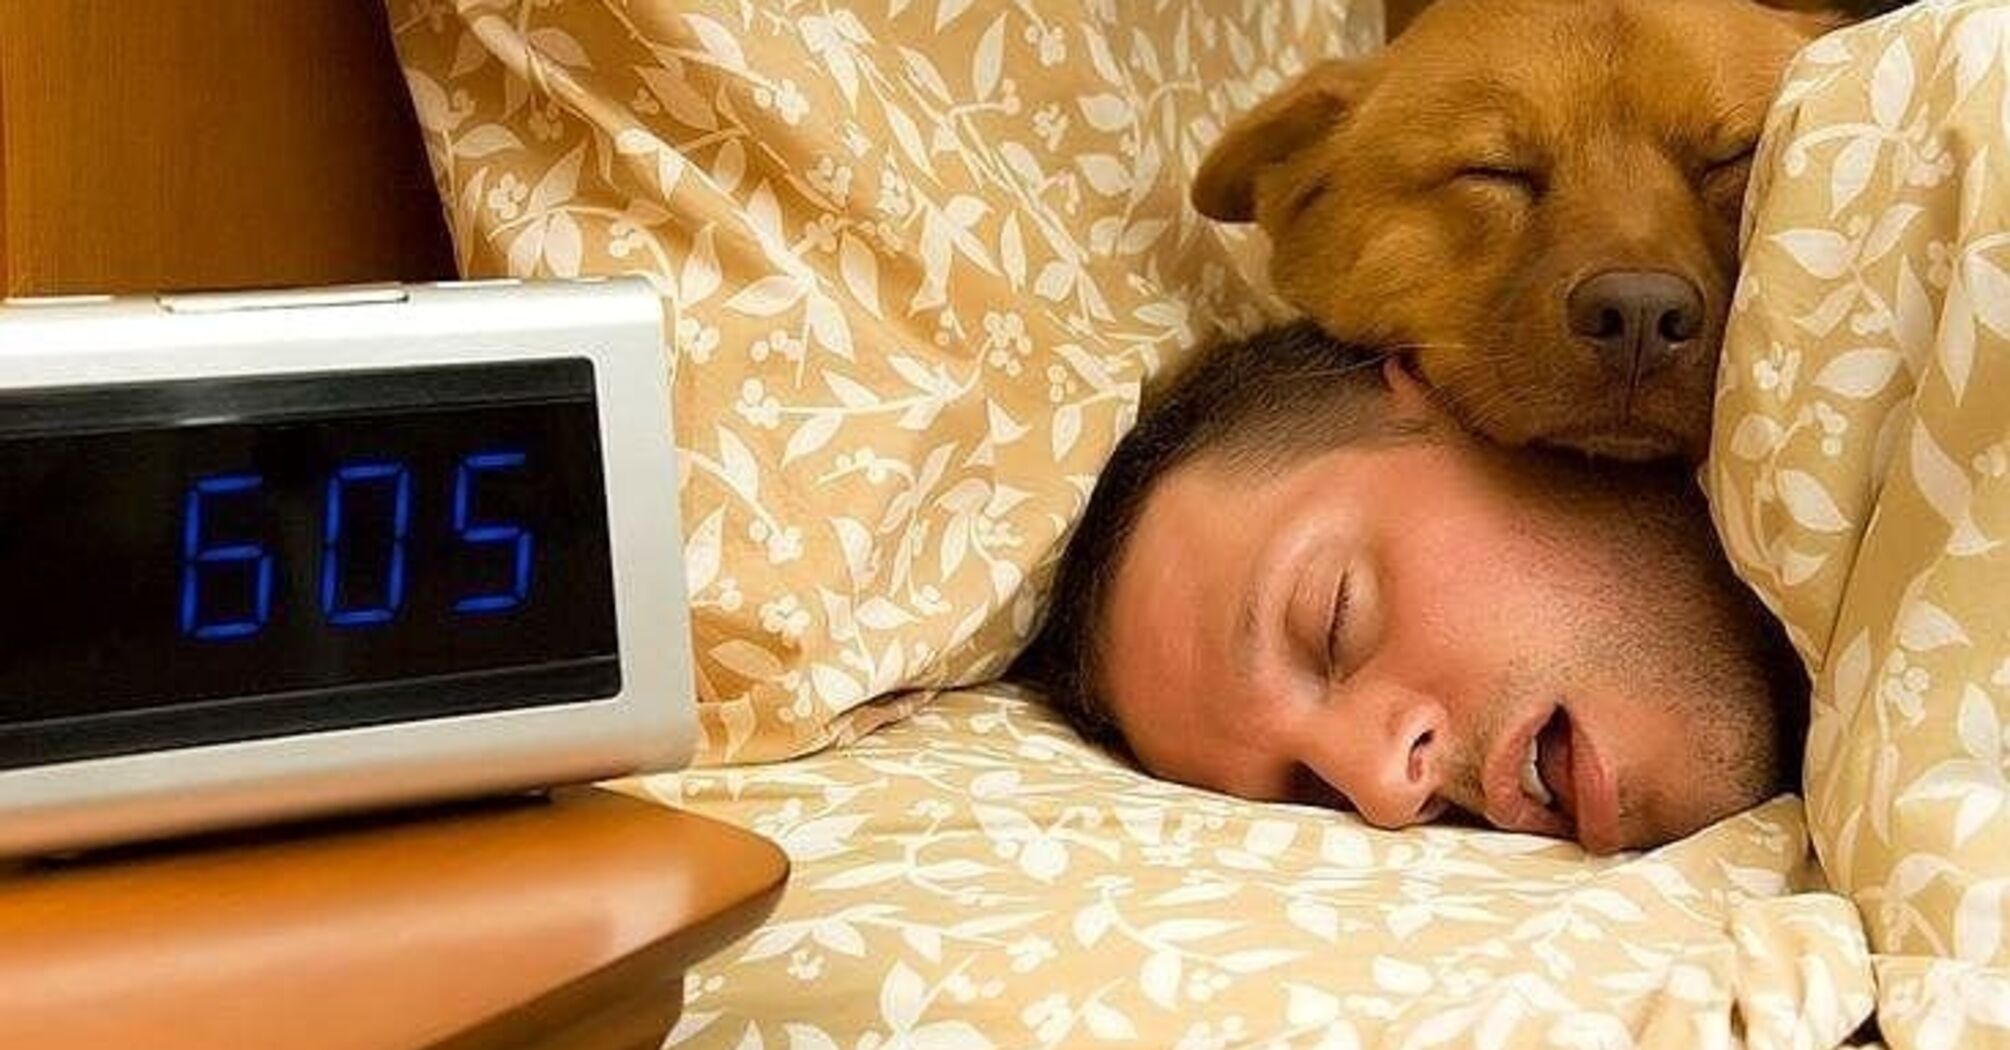 How to train a dog to stop sleeping on the owner's bed